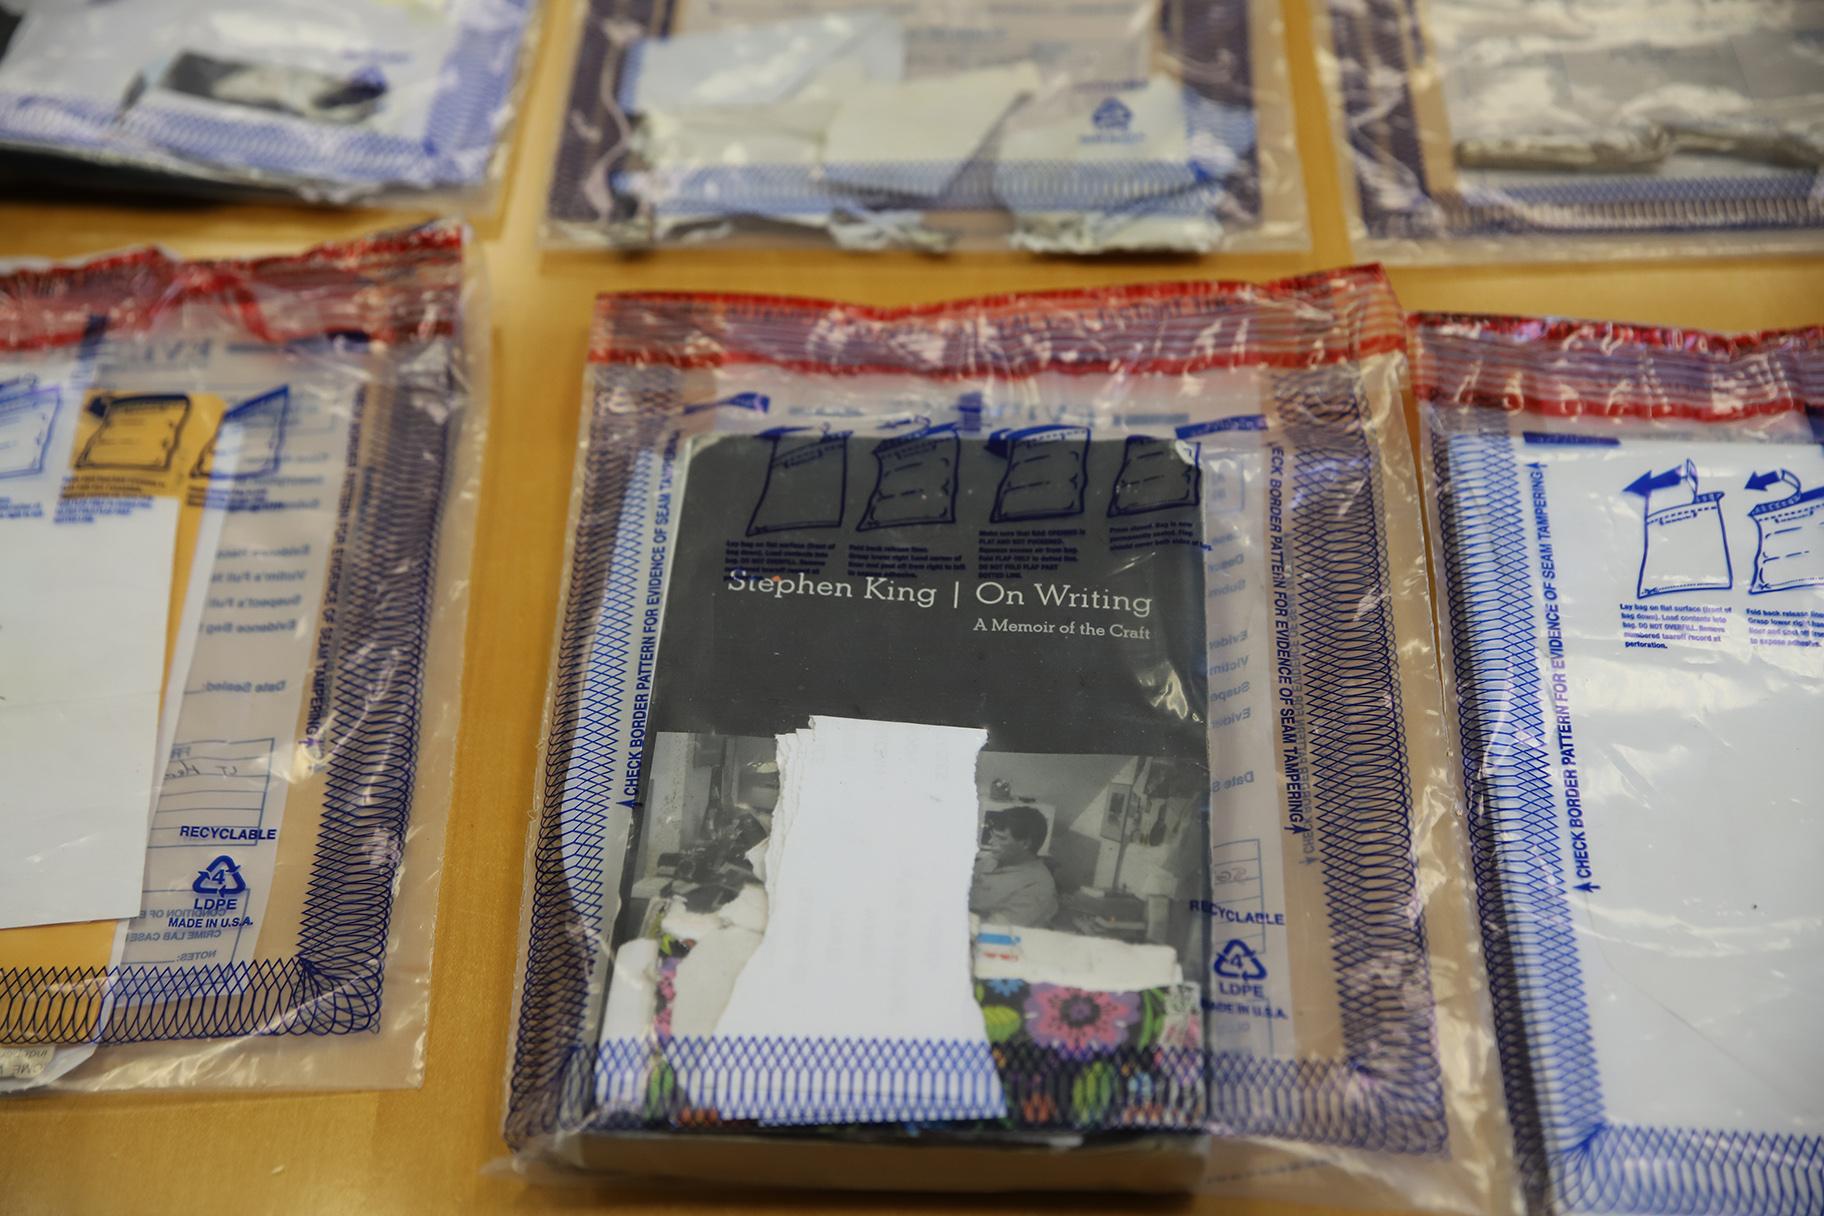 Bags of evidence lay on a table at Cook County Jail on Oct. 12. Books like "On Writing" by Stephen King were found as evidence having drug-soaked paper inside. (Cary Robbins / DePaul)